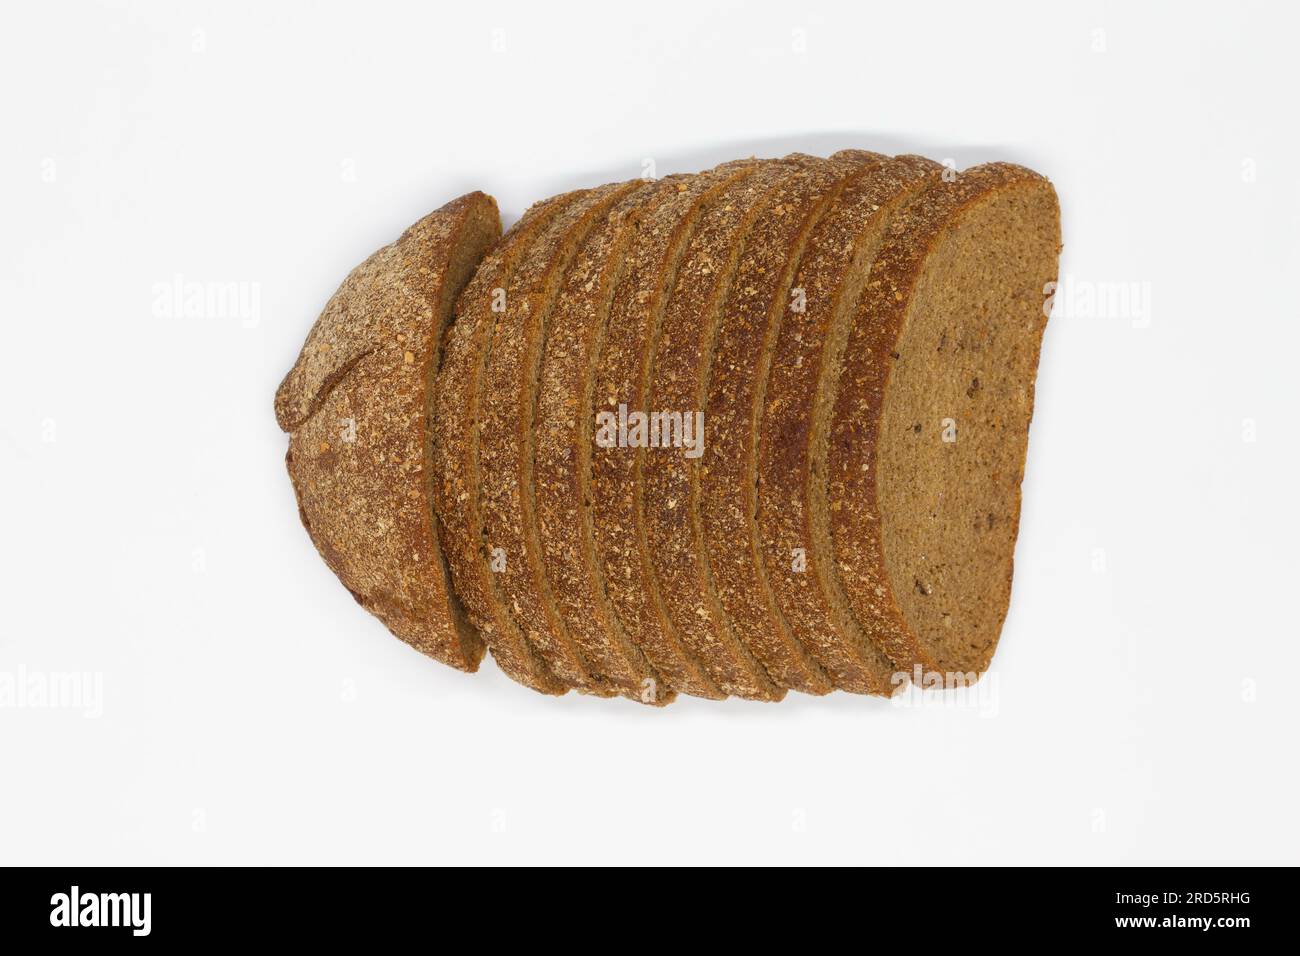 Sliced black bread. Dark rye bread with cumin cut into even pieces on a white background. Wheat black bread on the table. Isolated. Bran from grain. Stock Photo